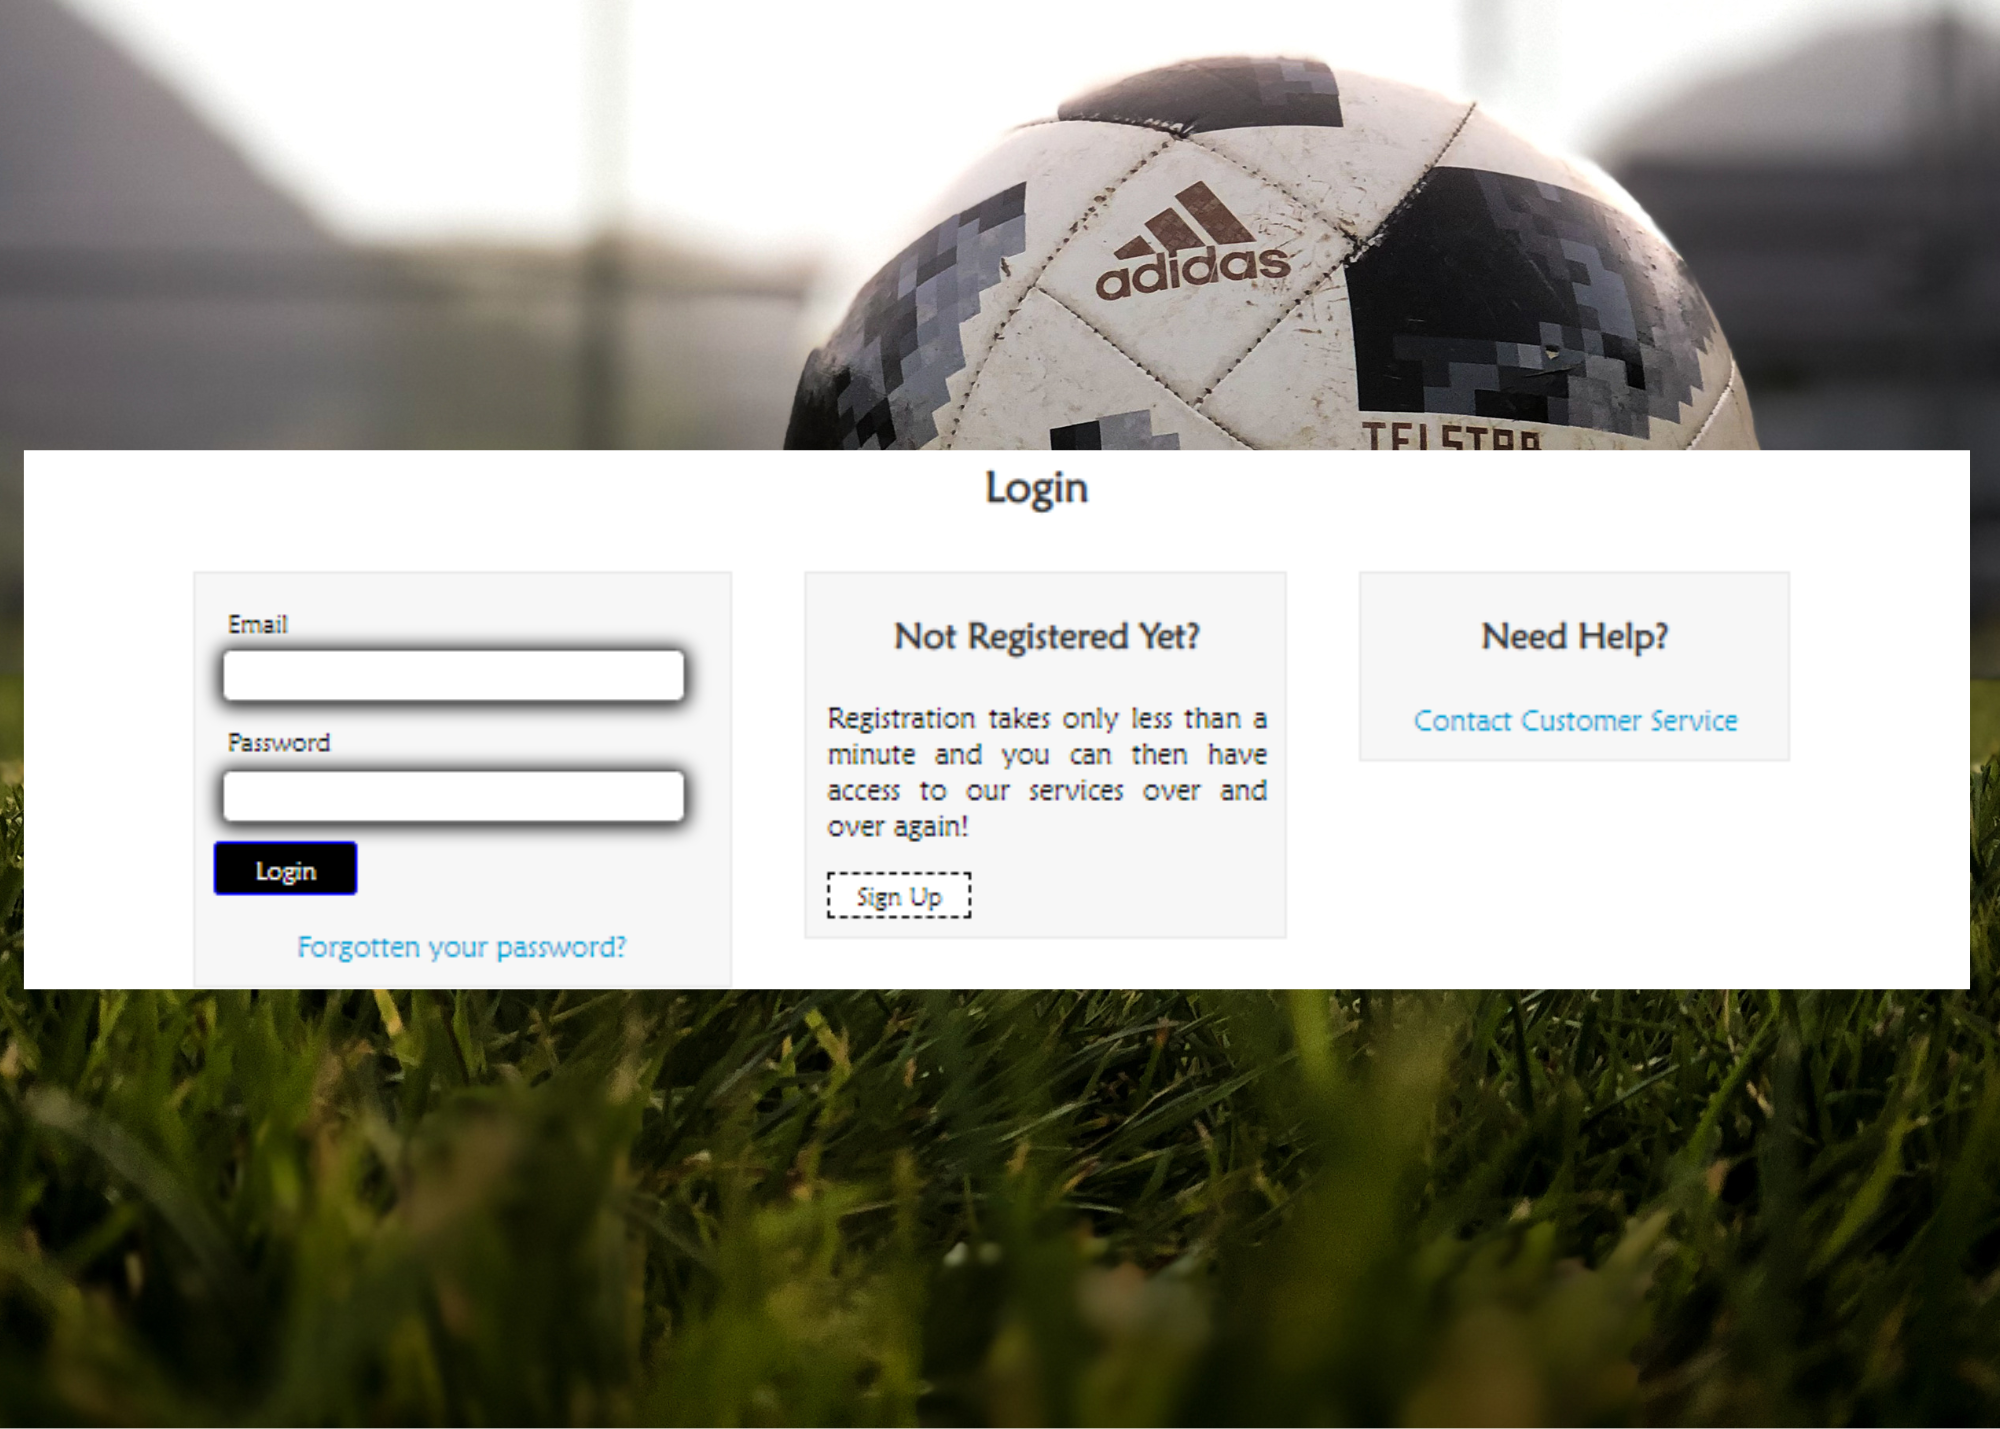 A screenshot of log-in information with an adidas soccer ball in the background